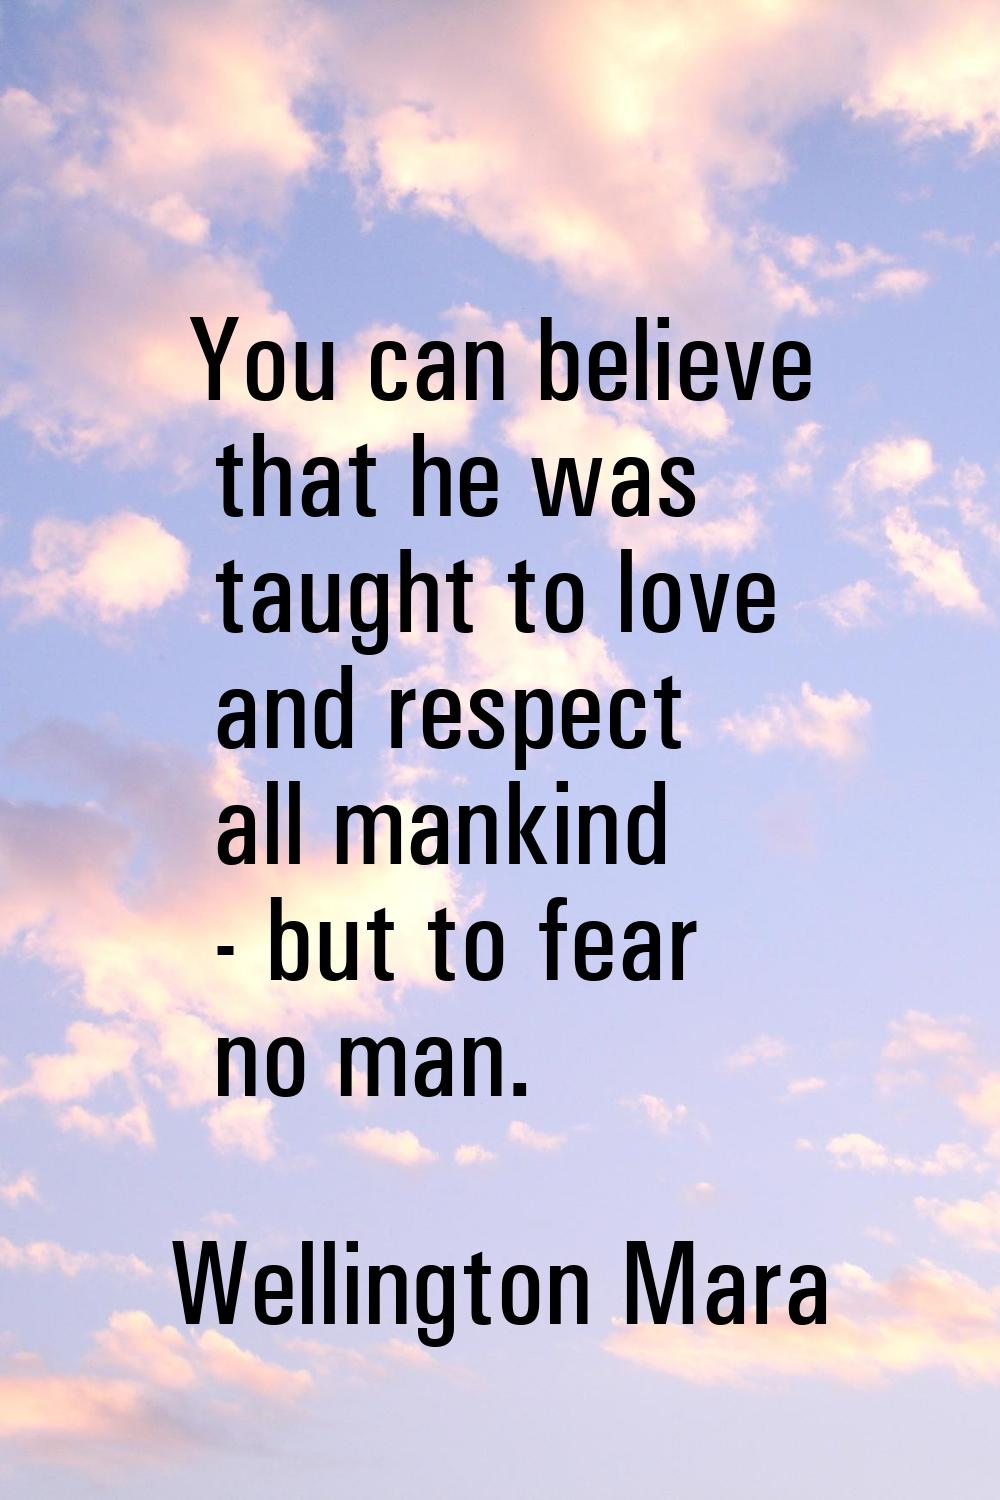 You can believe that he was taught to love and respect all mankind - but to fear no man.